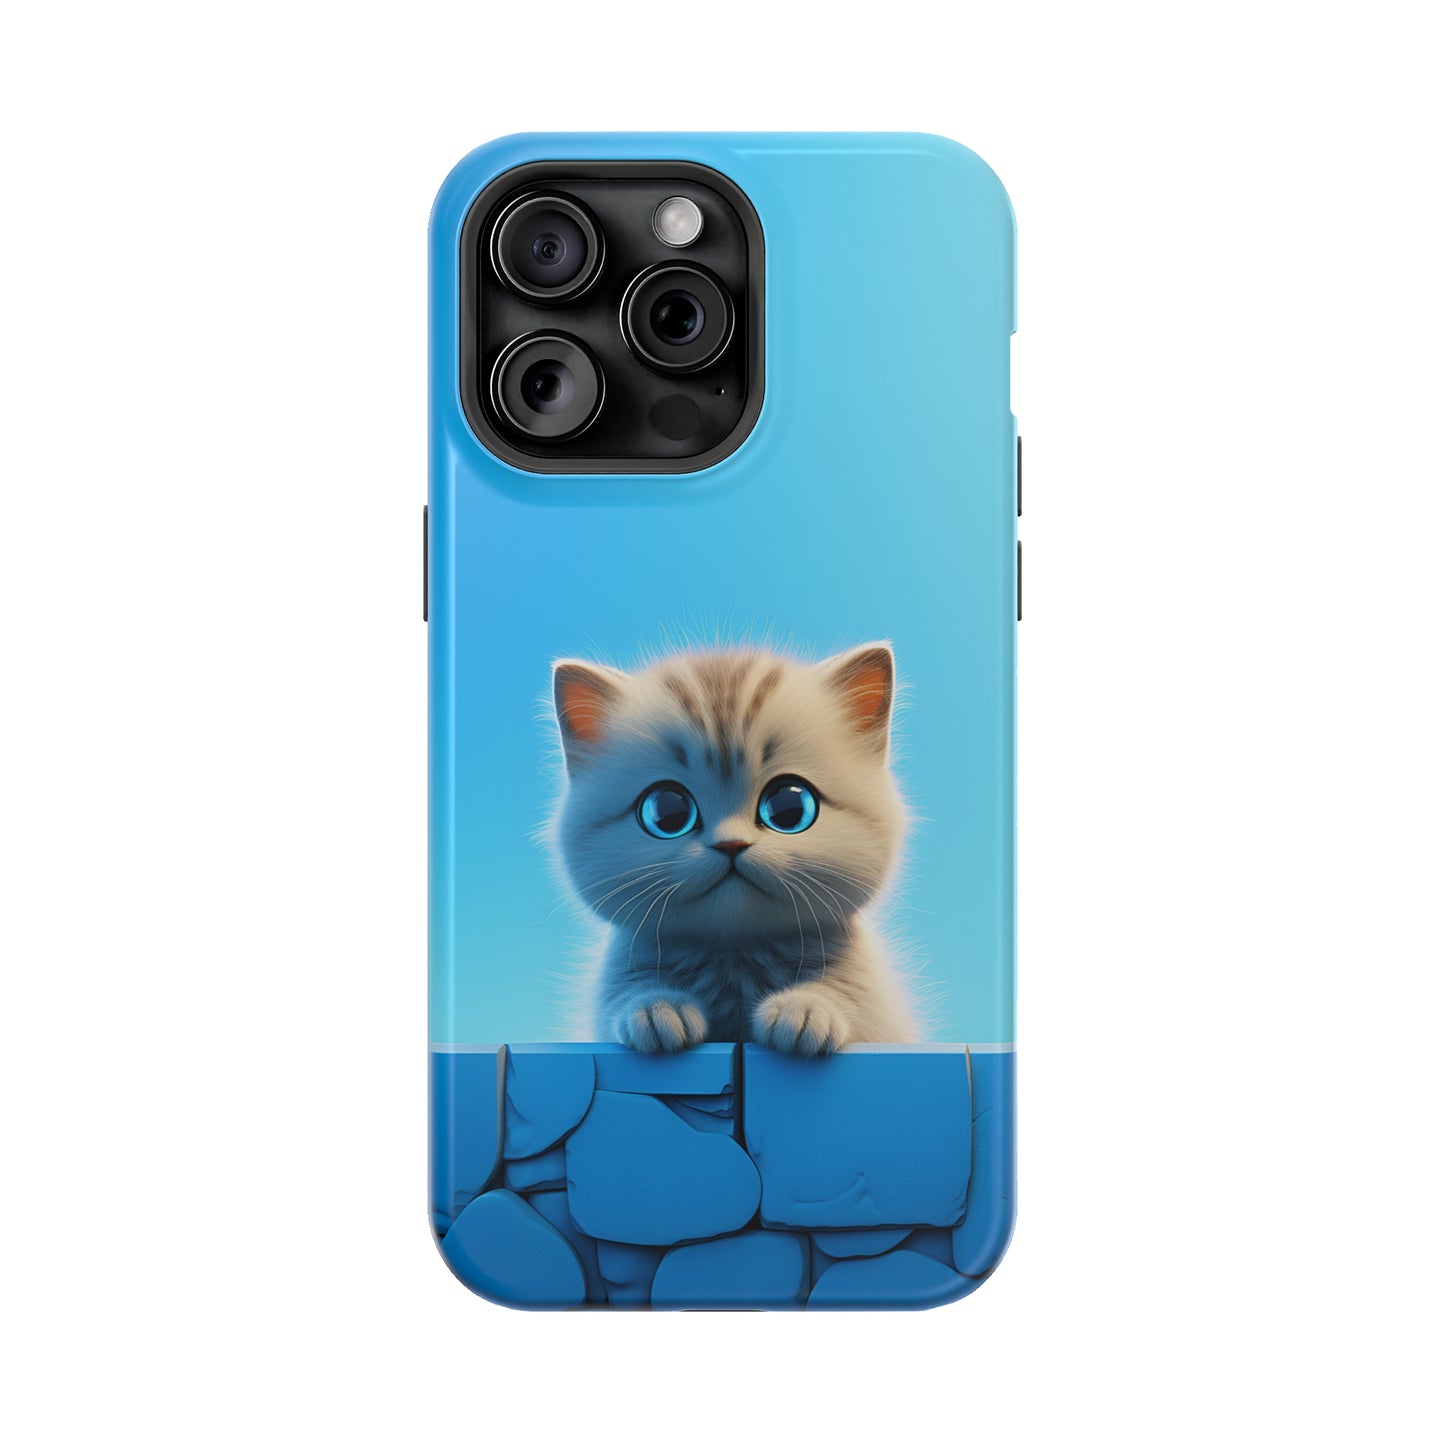 Cute Cat in Blue Sky MagSafe Durable Case: Style Meets Protection 📱✨
Upgrade your device with Rima Gallery's Cute Cat in Blue Sky MagSafe Durable Case. This case is-Blue Sky (iPhone MagSafe Case)